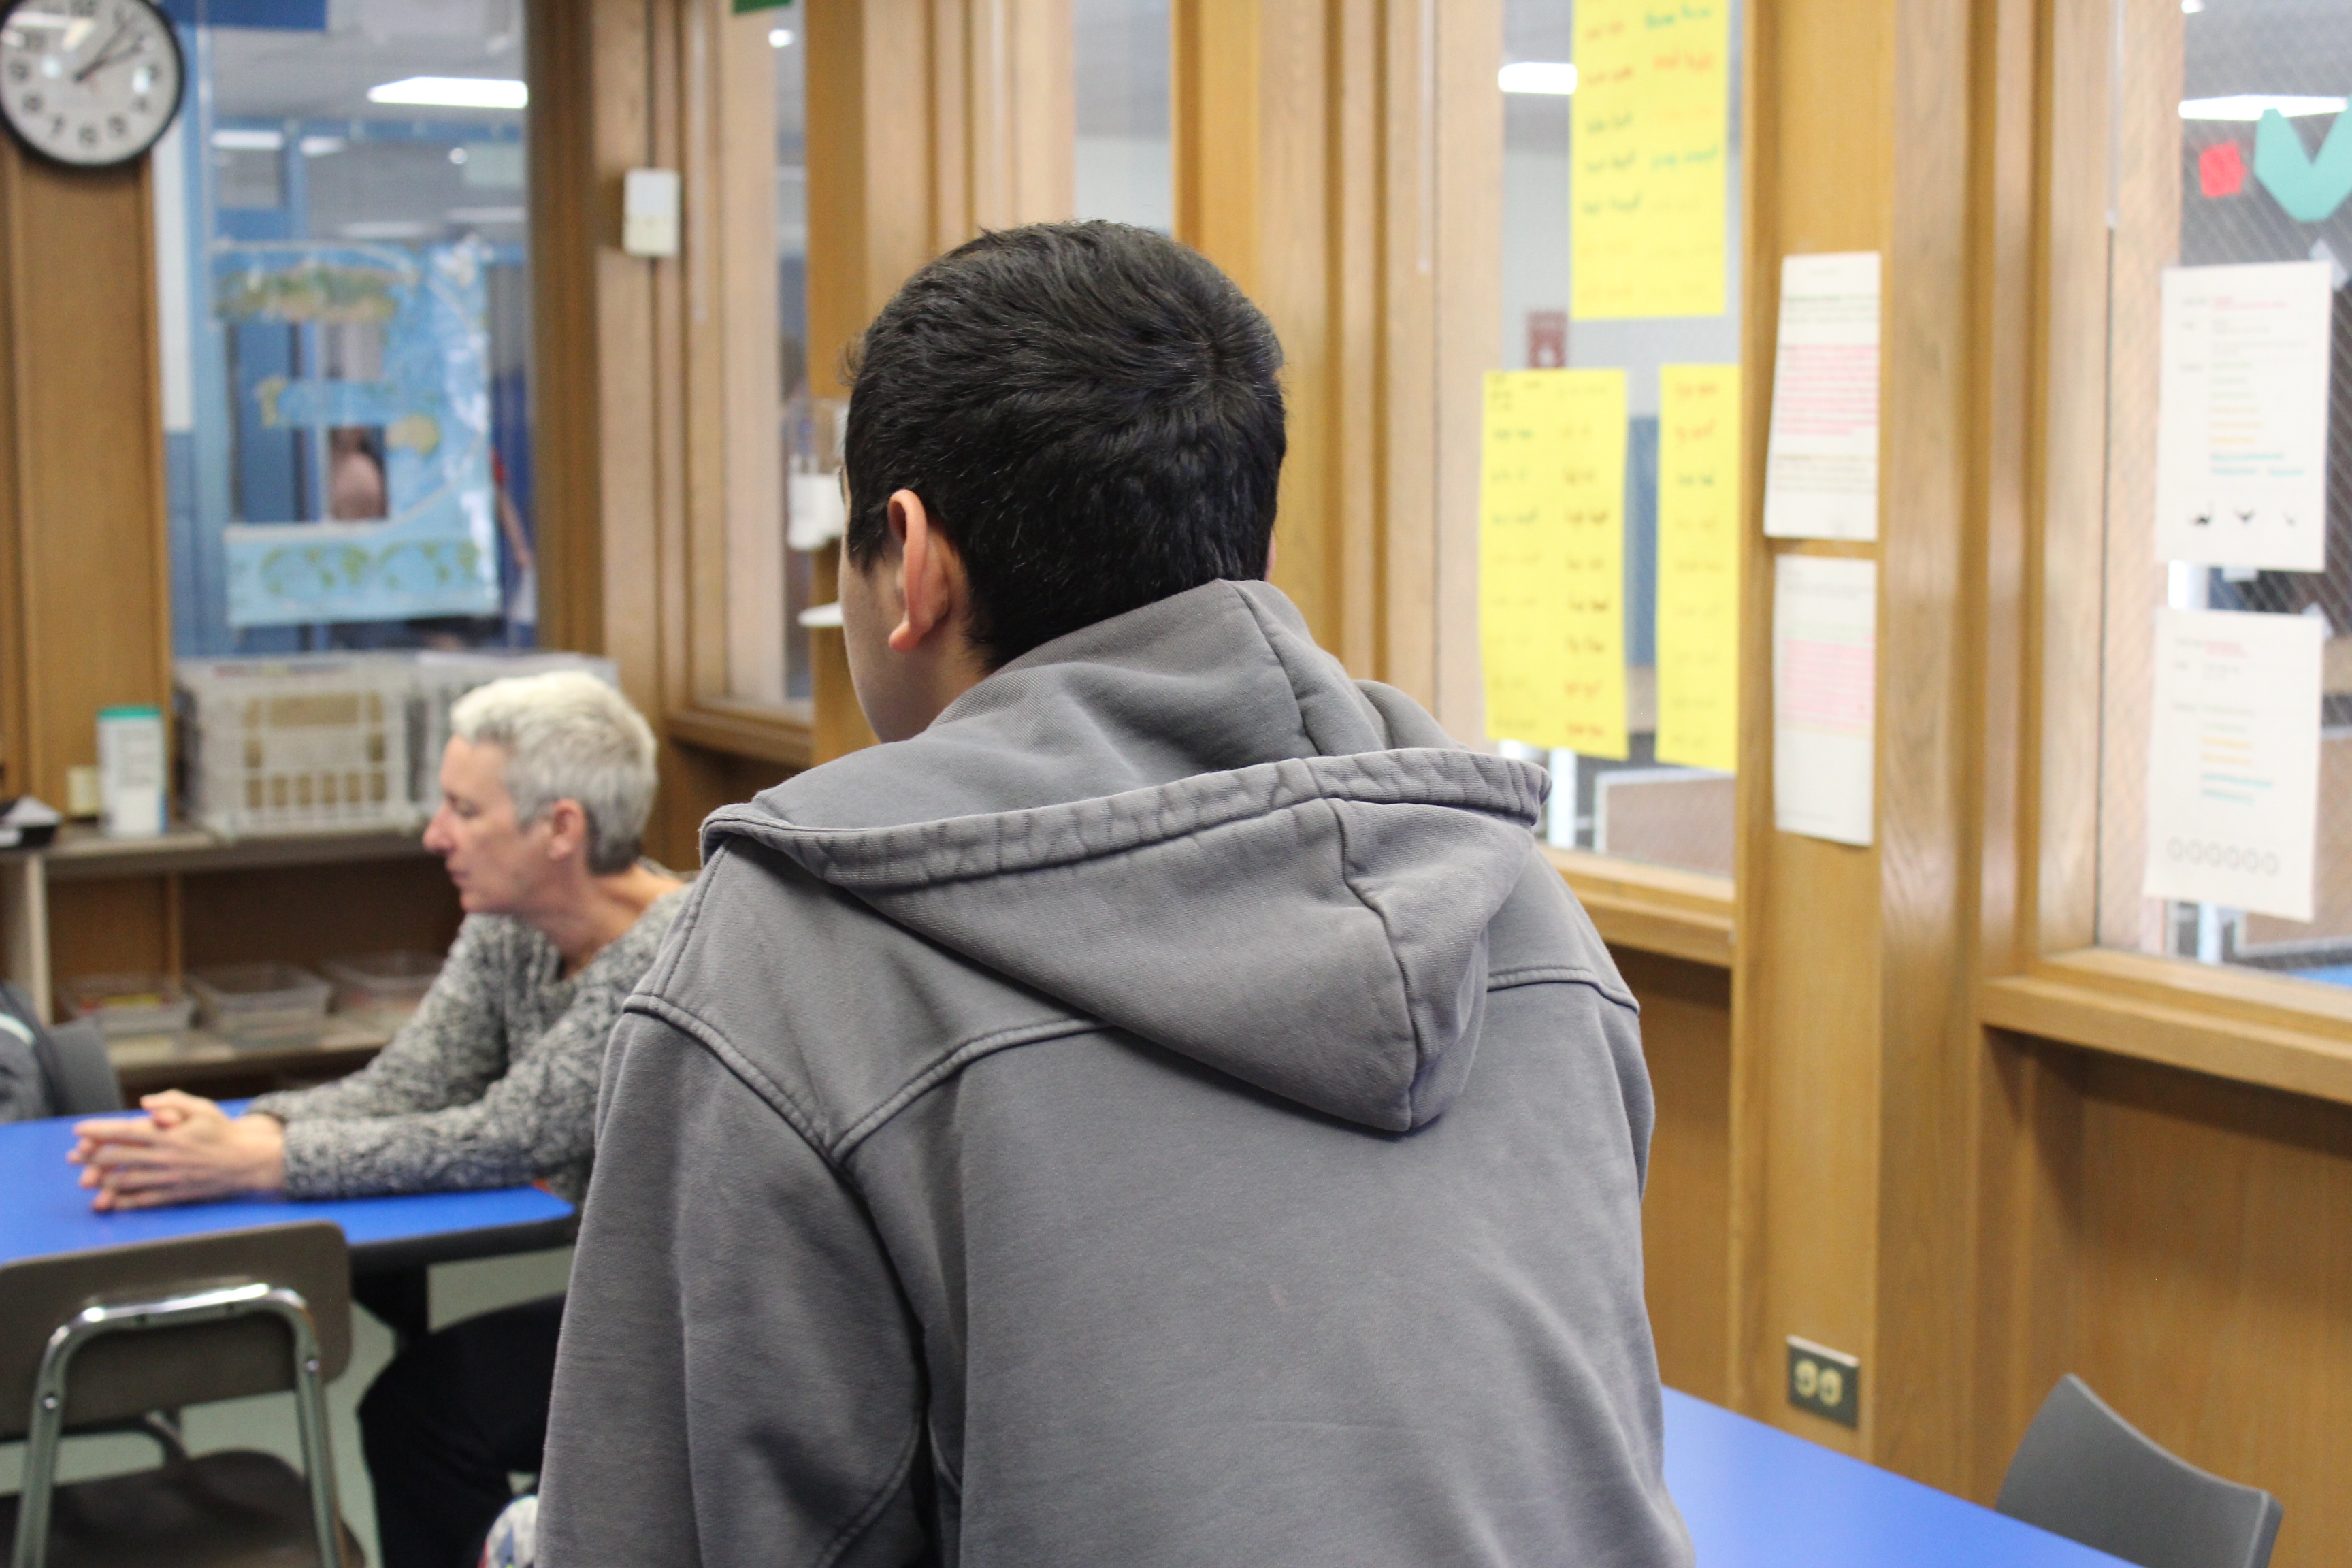 As of this year, roughly 11% of all Rhode Island public school students are classified as English Learners. These students have been among those most impacted by the pandemic's disruptions.